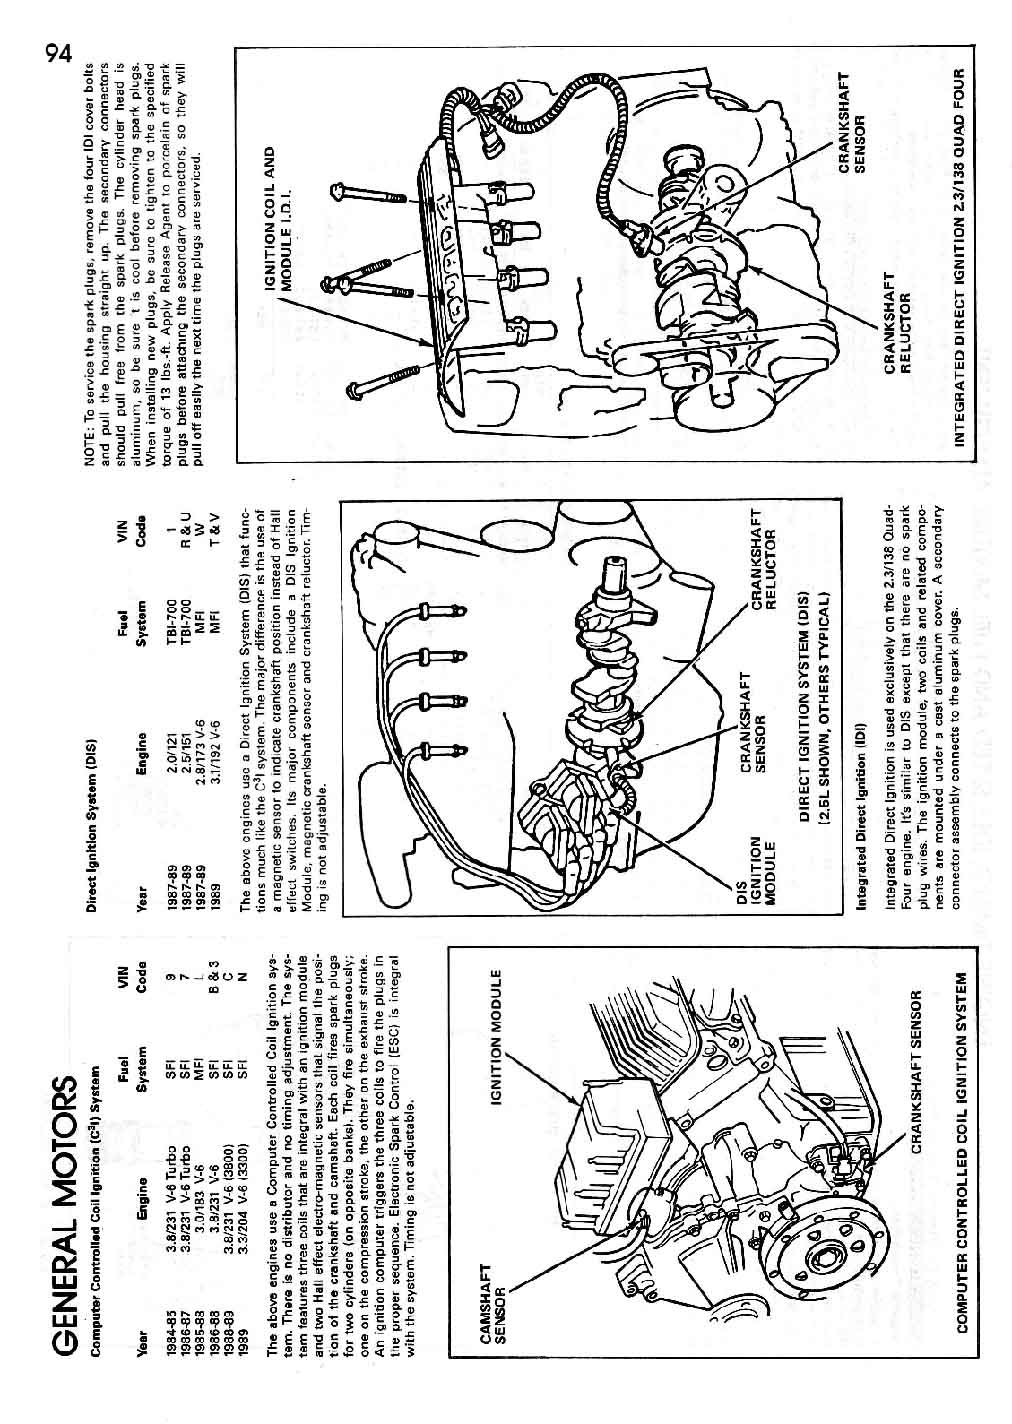 ACDELCO_SD-100A_page_94_copy